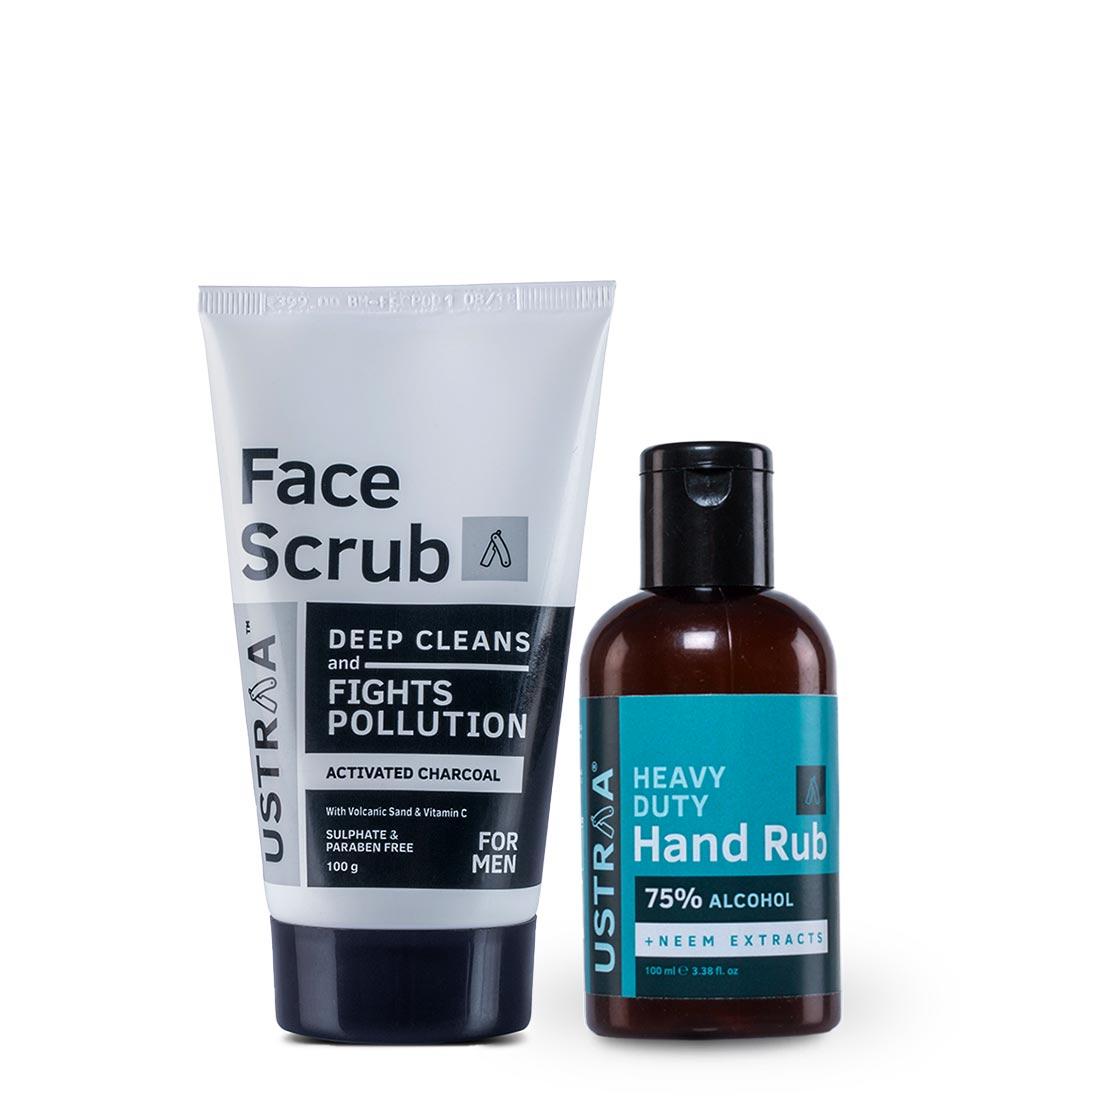 Face Scrub - Activated Charcoal and Hand Rub